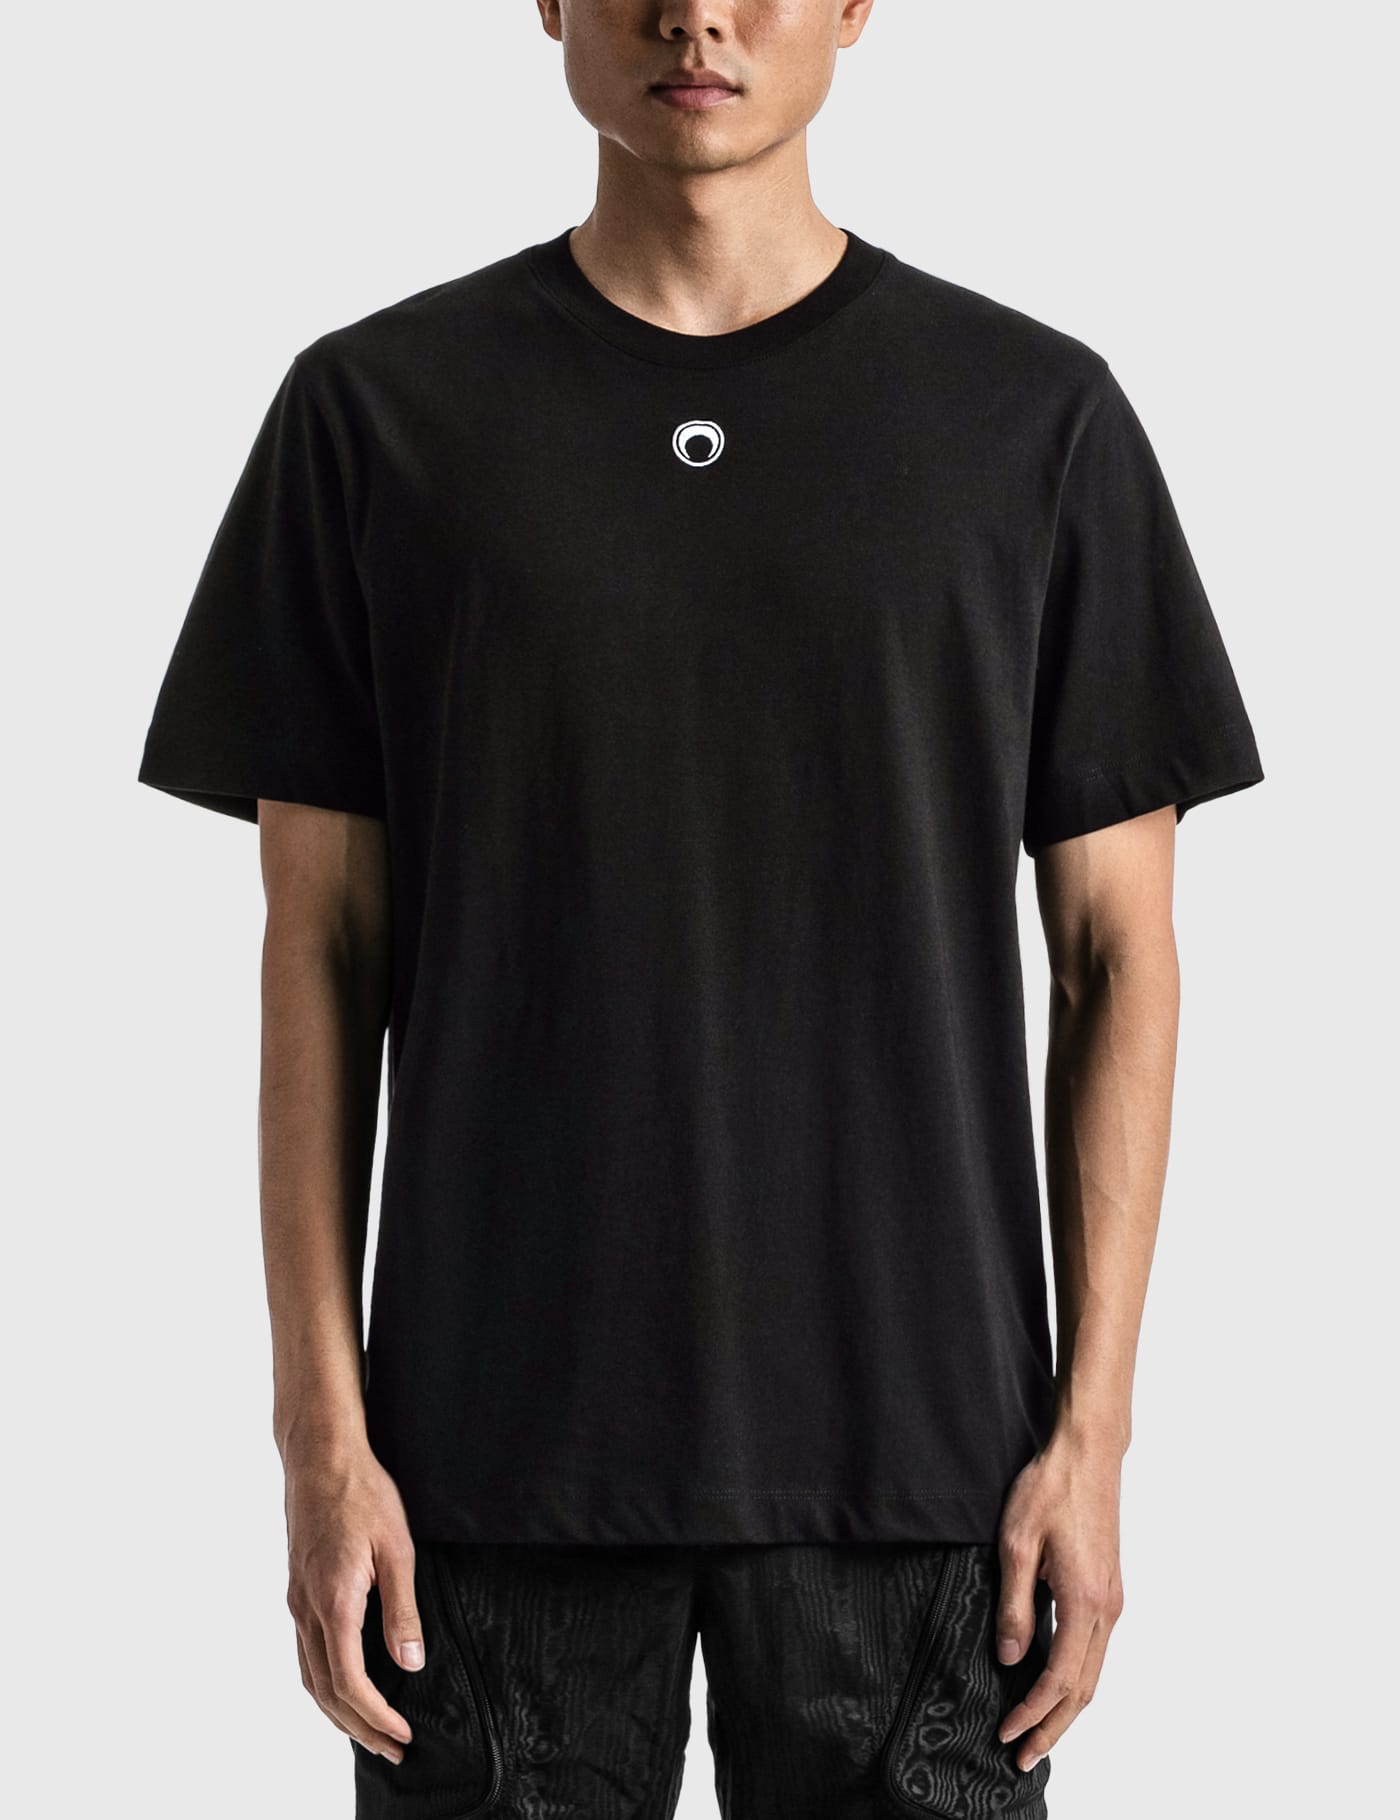 Marine Serre - Organic Cotton T-shirt | HBX - Globally Curated Fashion and  Lifestyle by Hypebeast